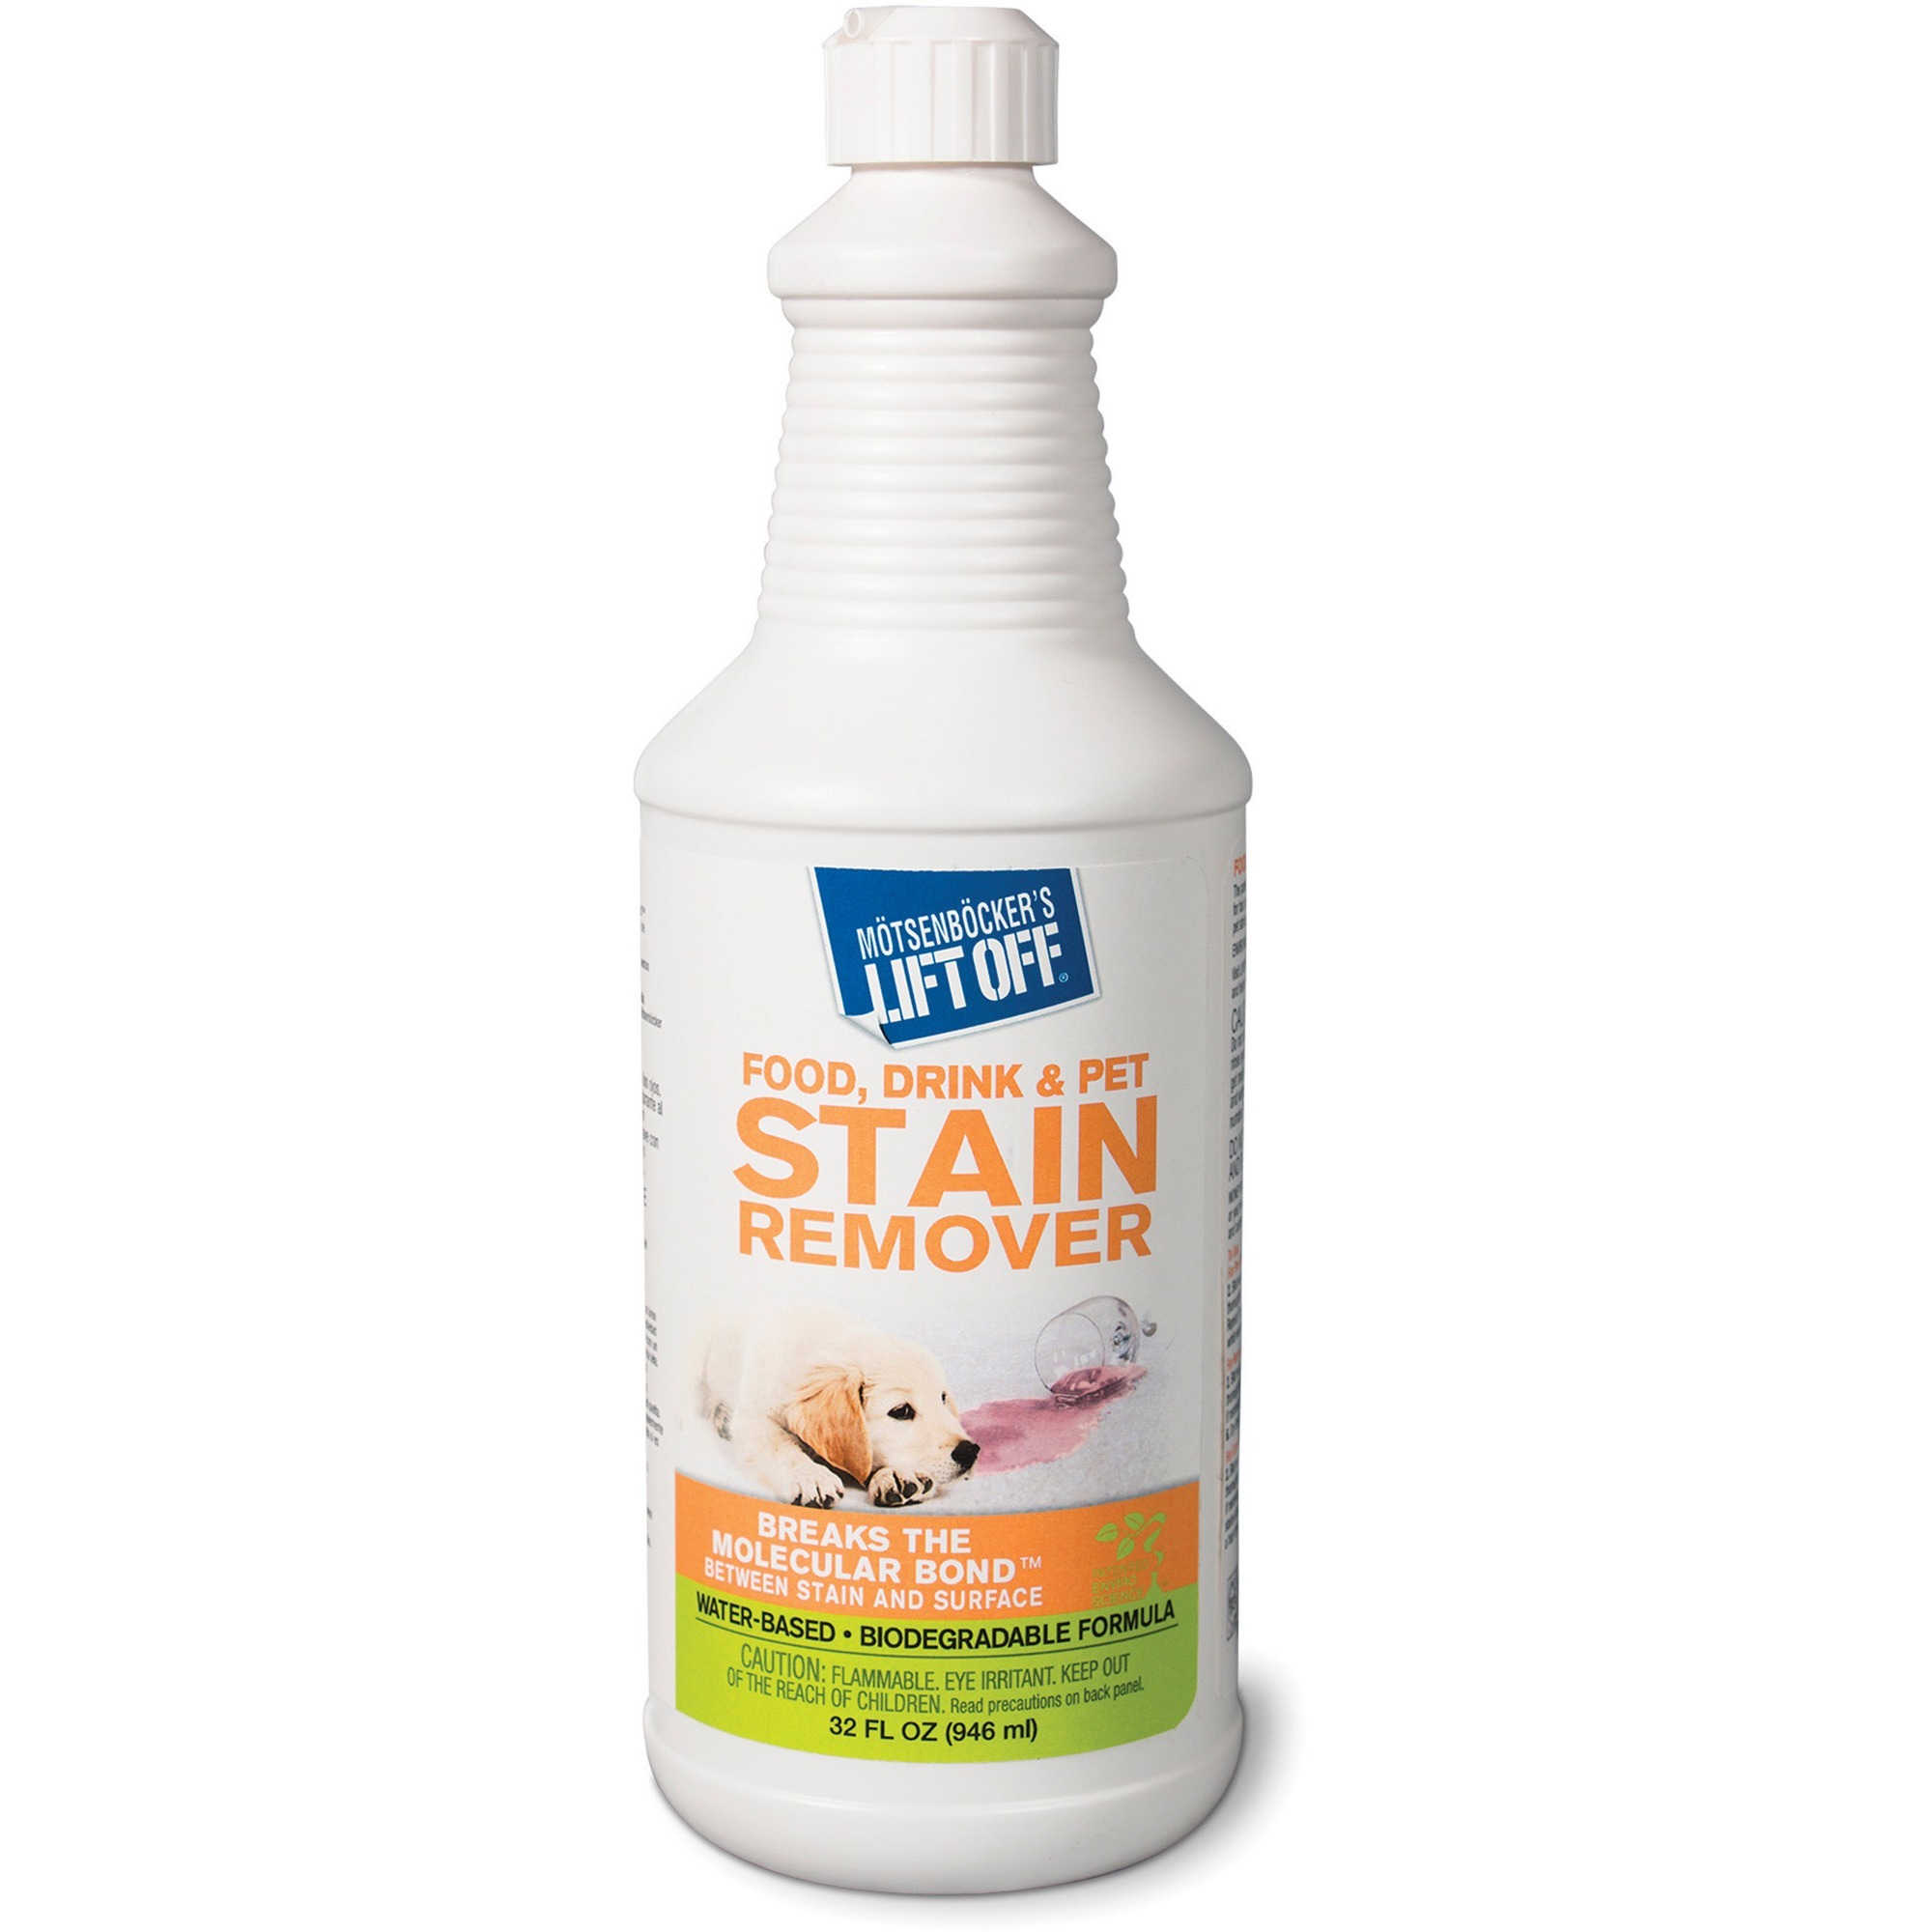 Food/Beverage/Protein Stain Remover, 32oz Pour Bottle